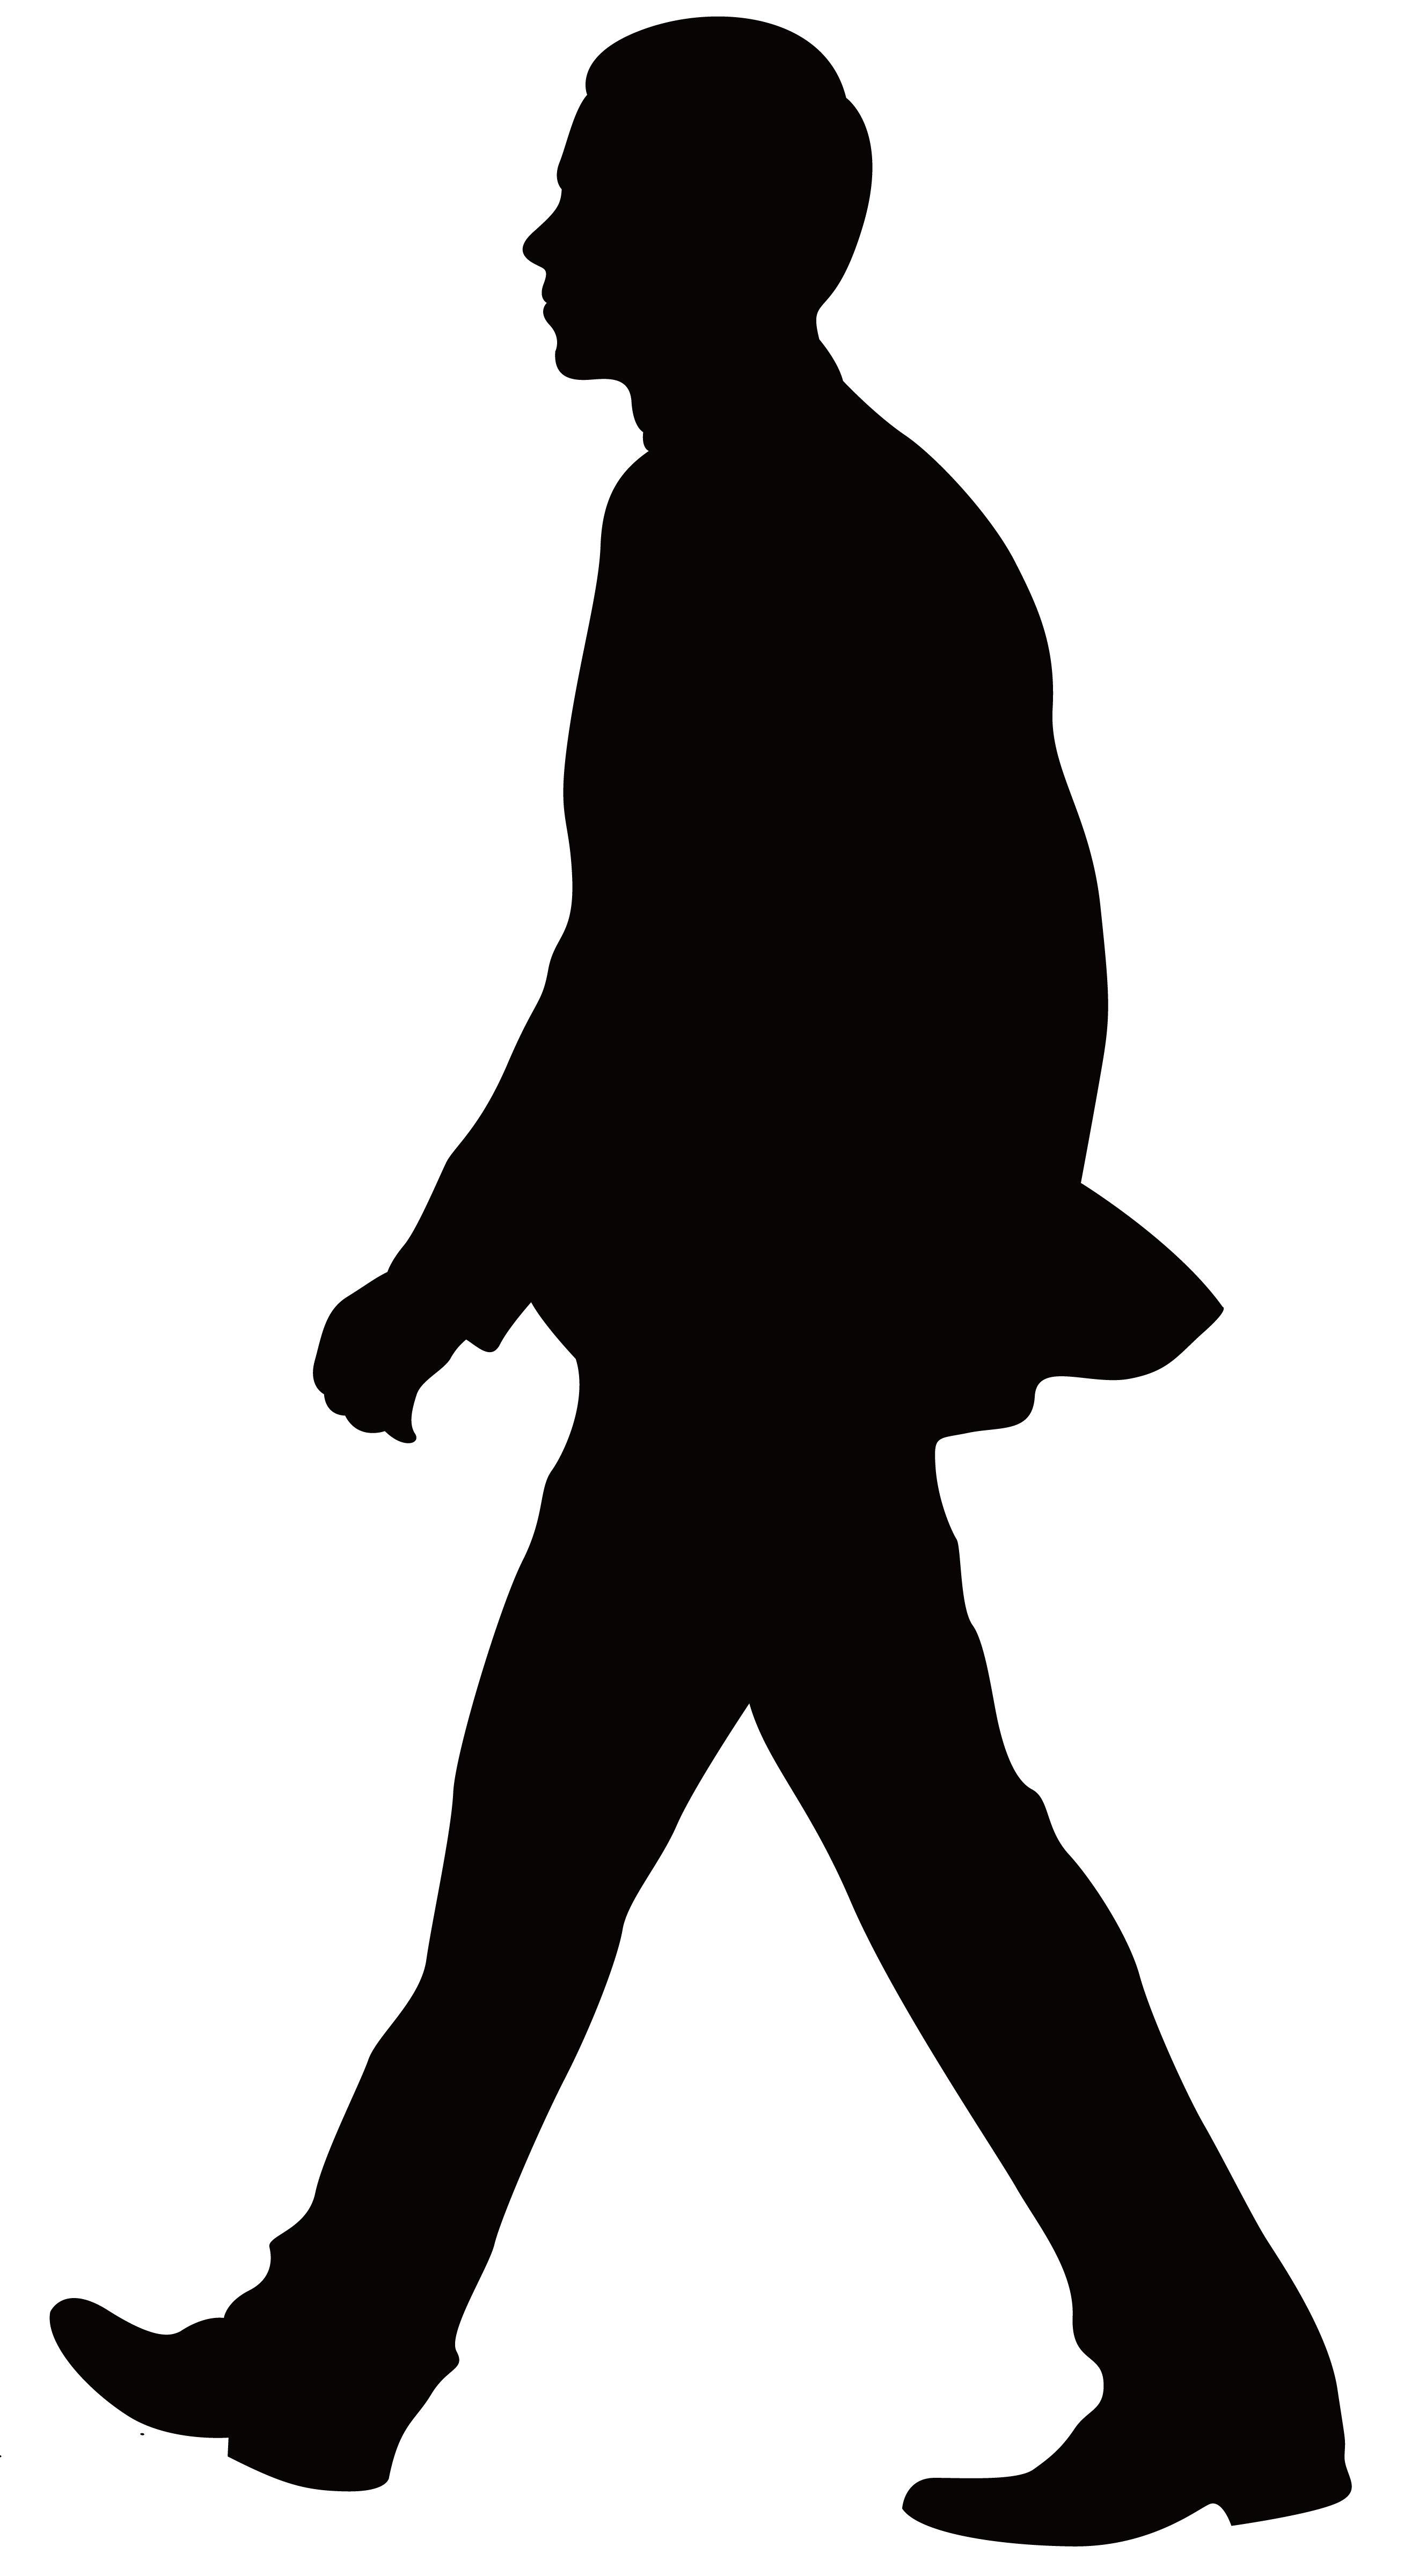 Silhouette Download - Man silhouette png download - 2657*4801 - Free ...